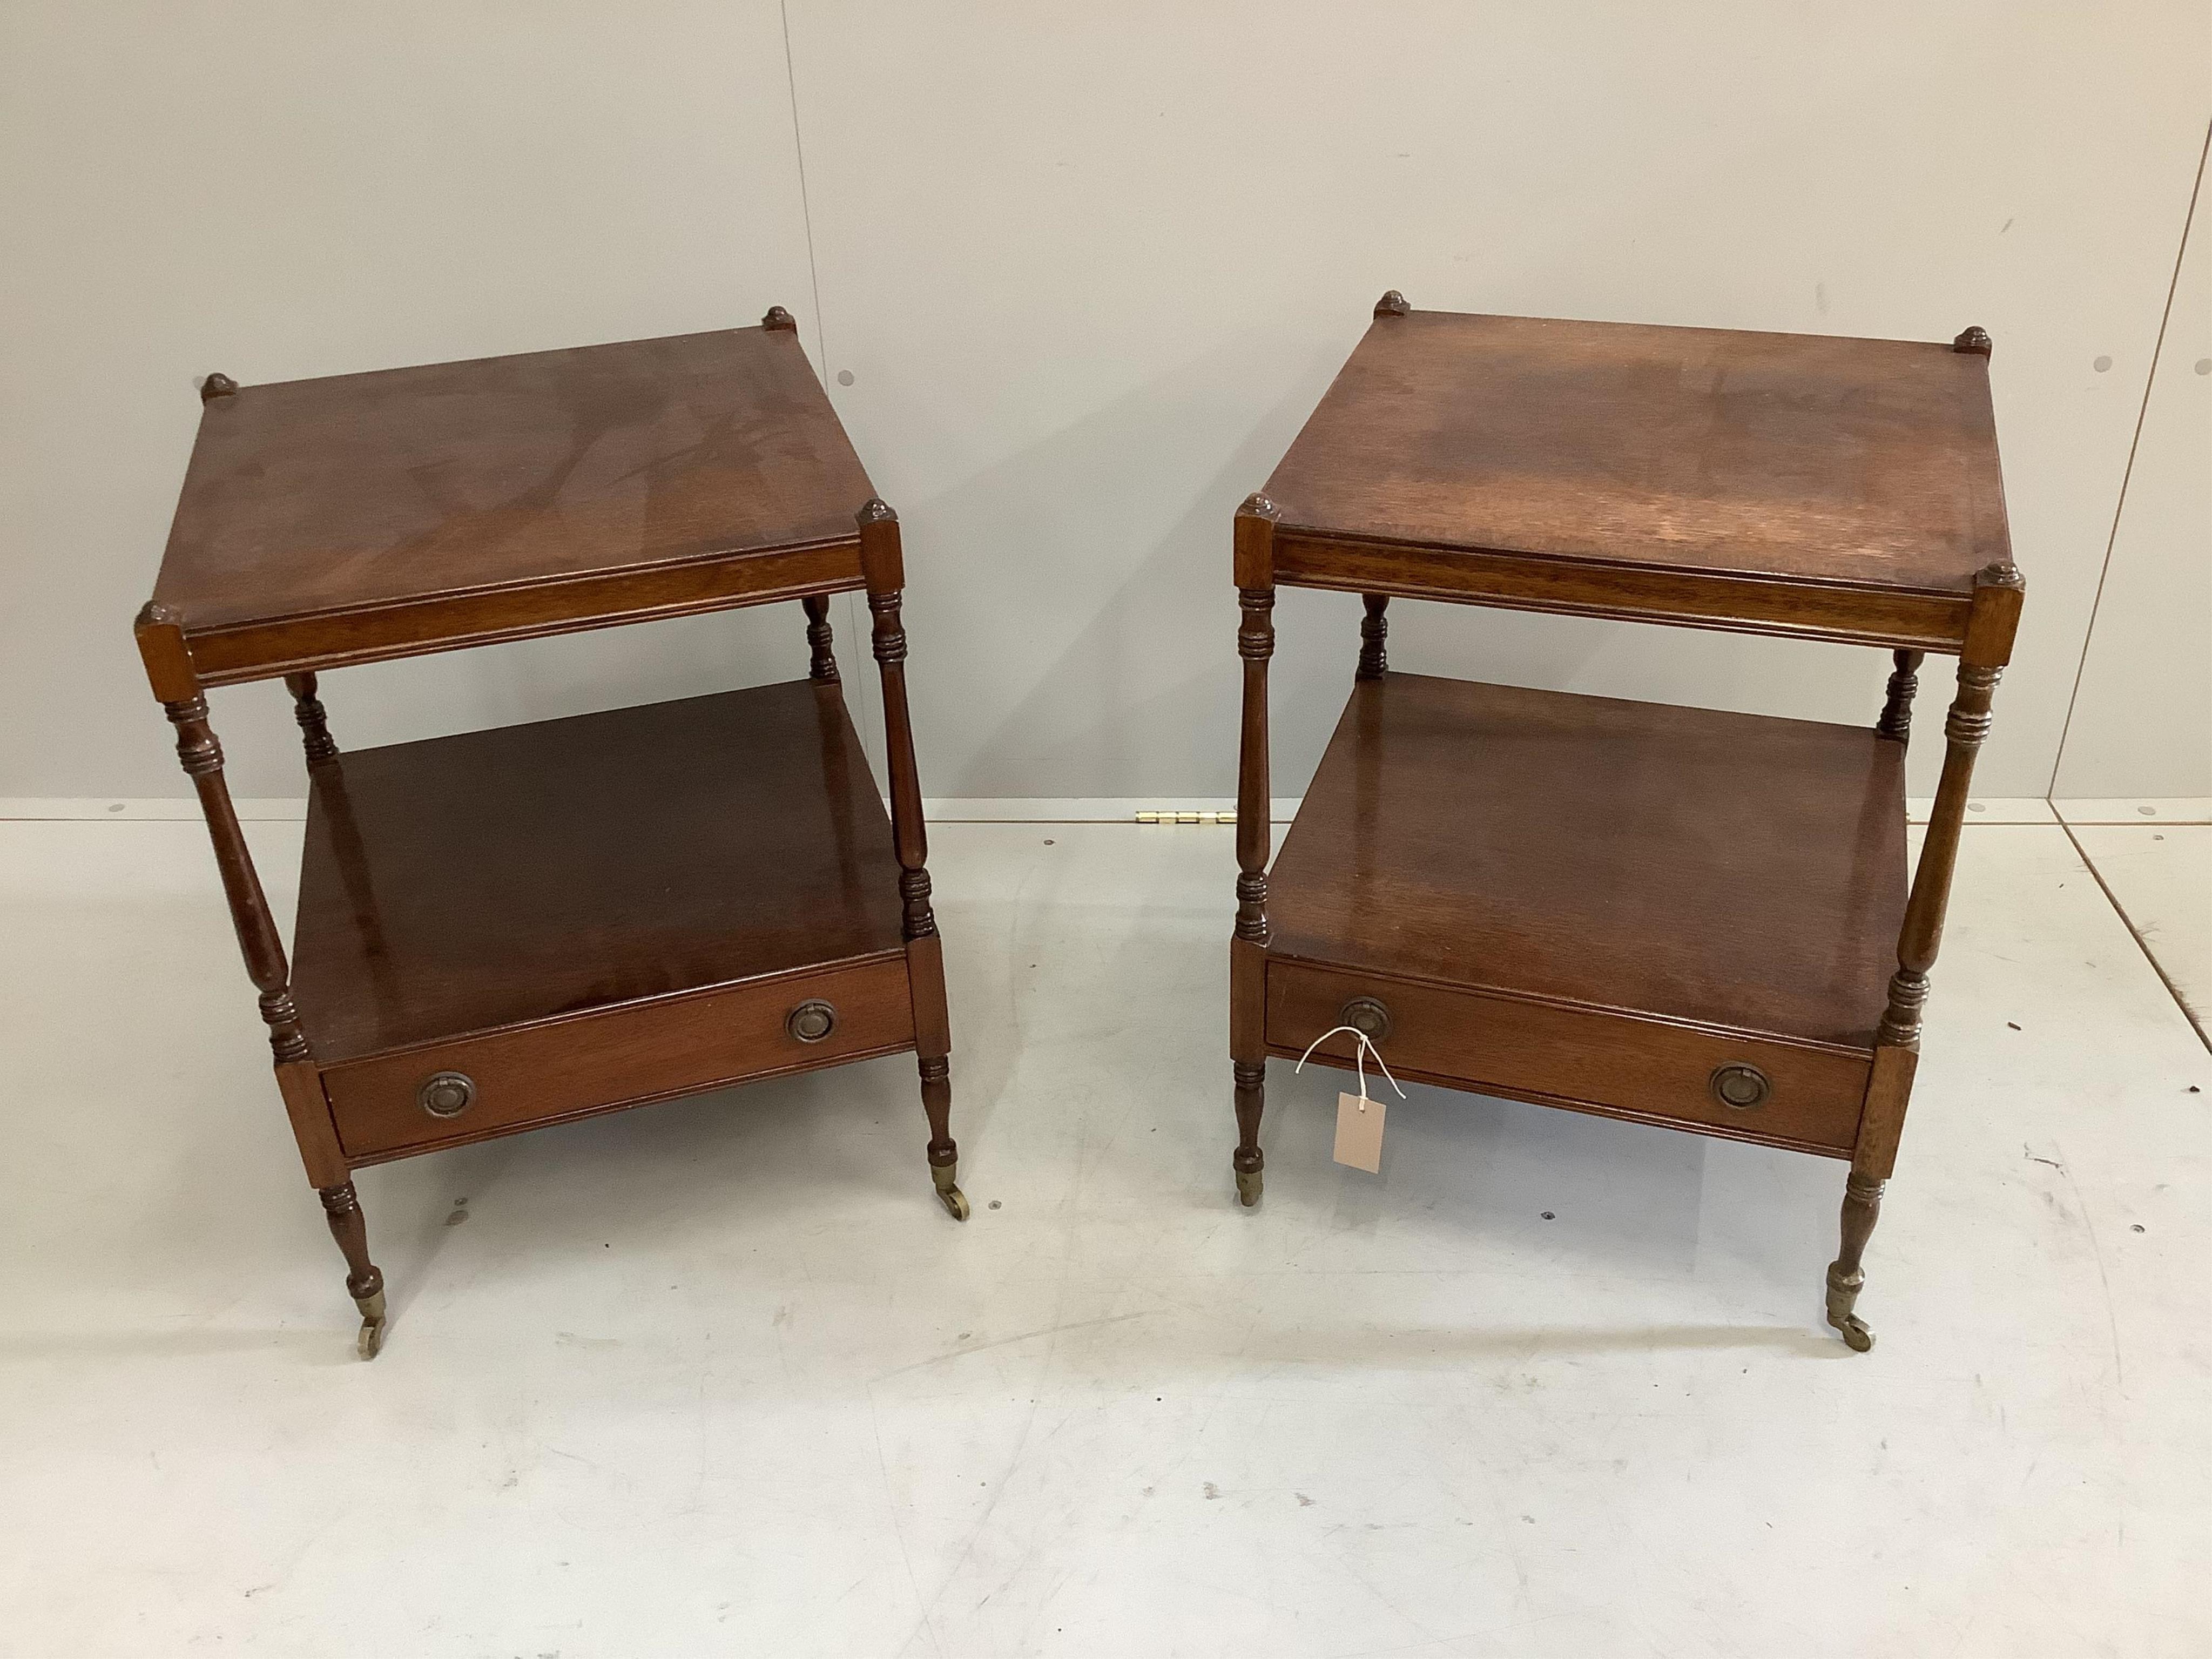 A pair of reproduction mahogany two tier occasional tables, width 45cm, depth 45cm, height 60cm. Condition - fair